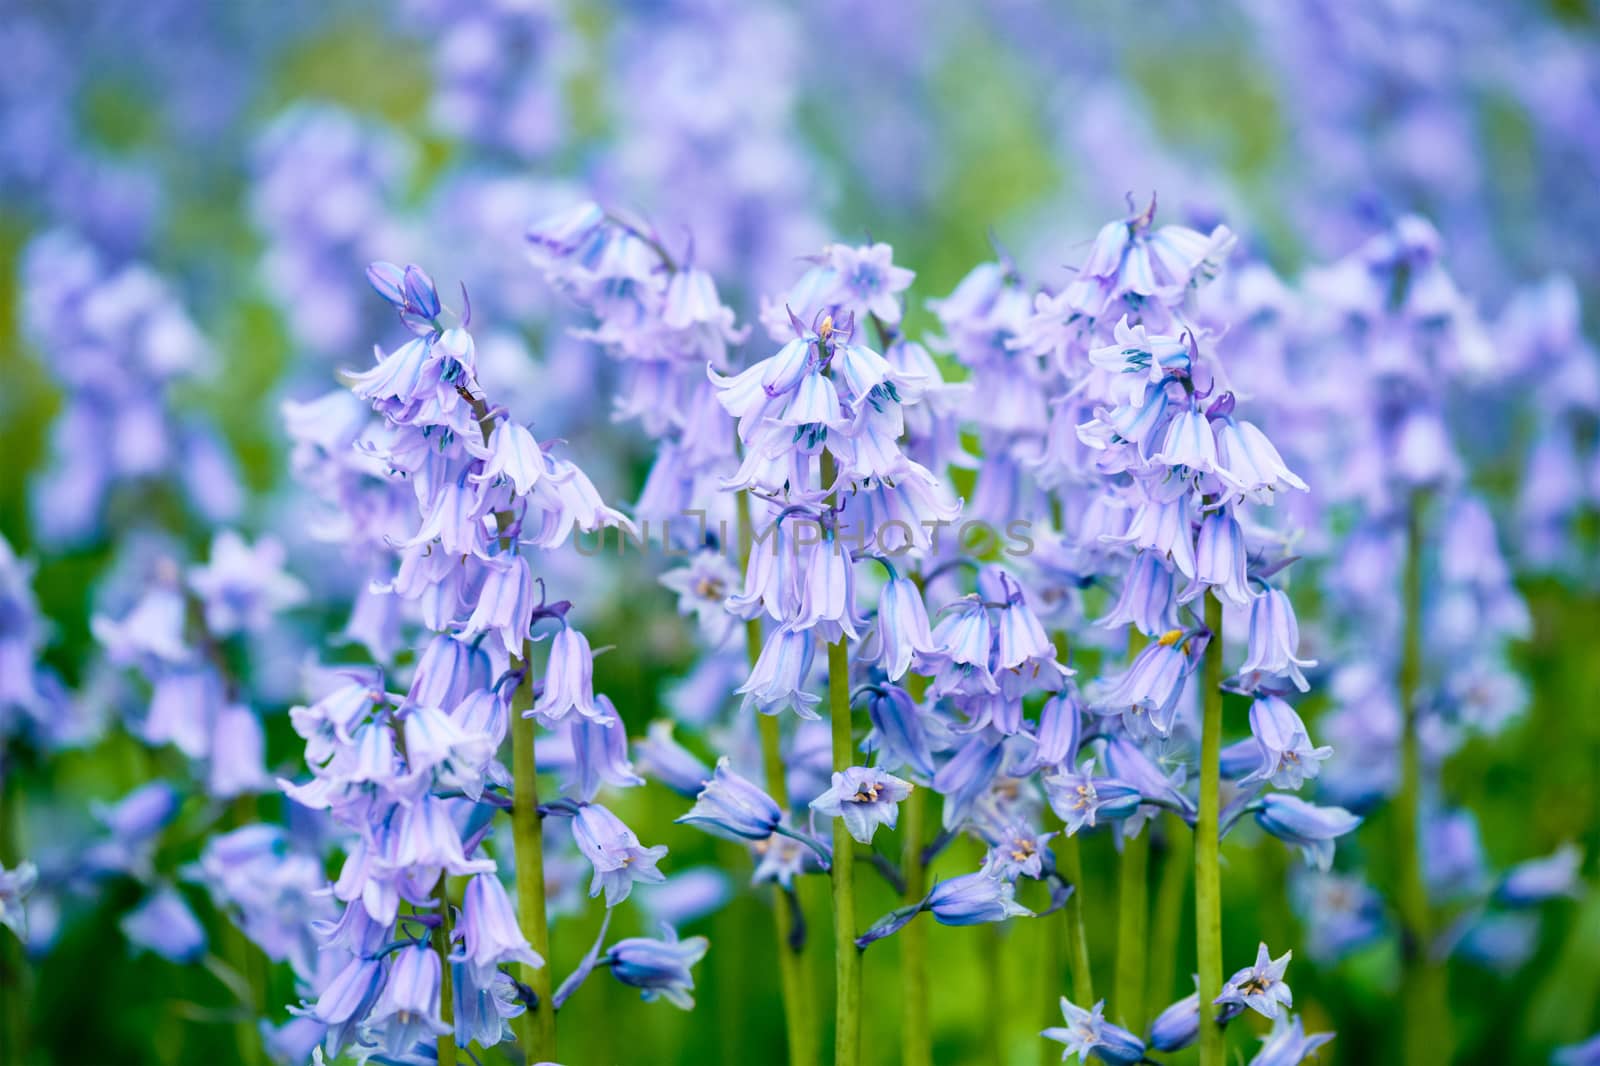 Blue Spanish bluebell Hyacinthoides hispanica flowers in the field by dimol